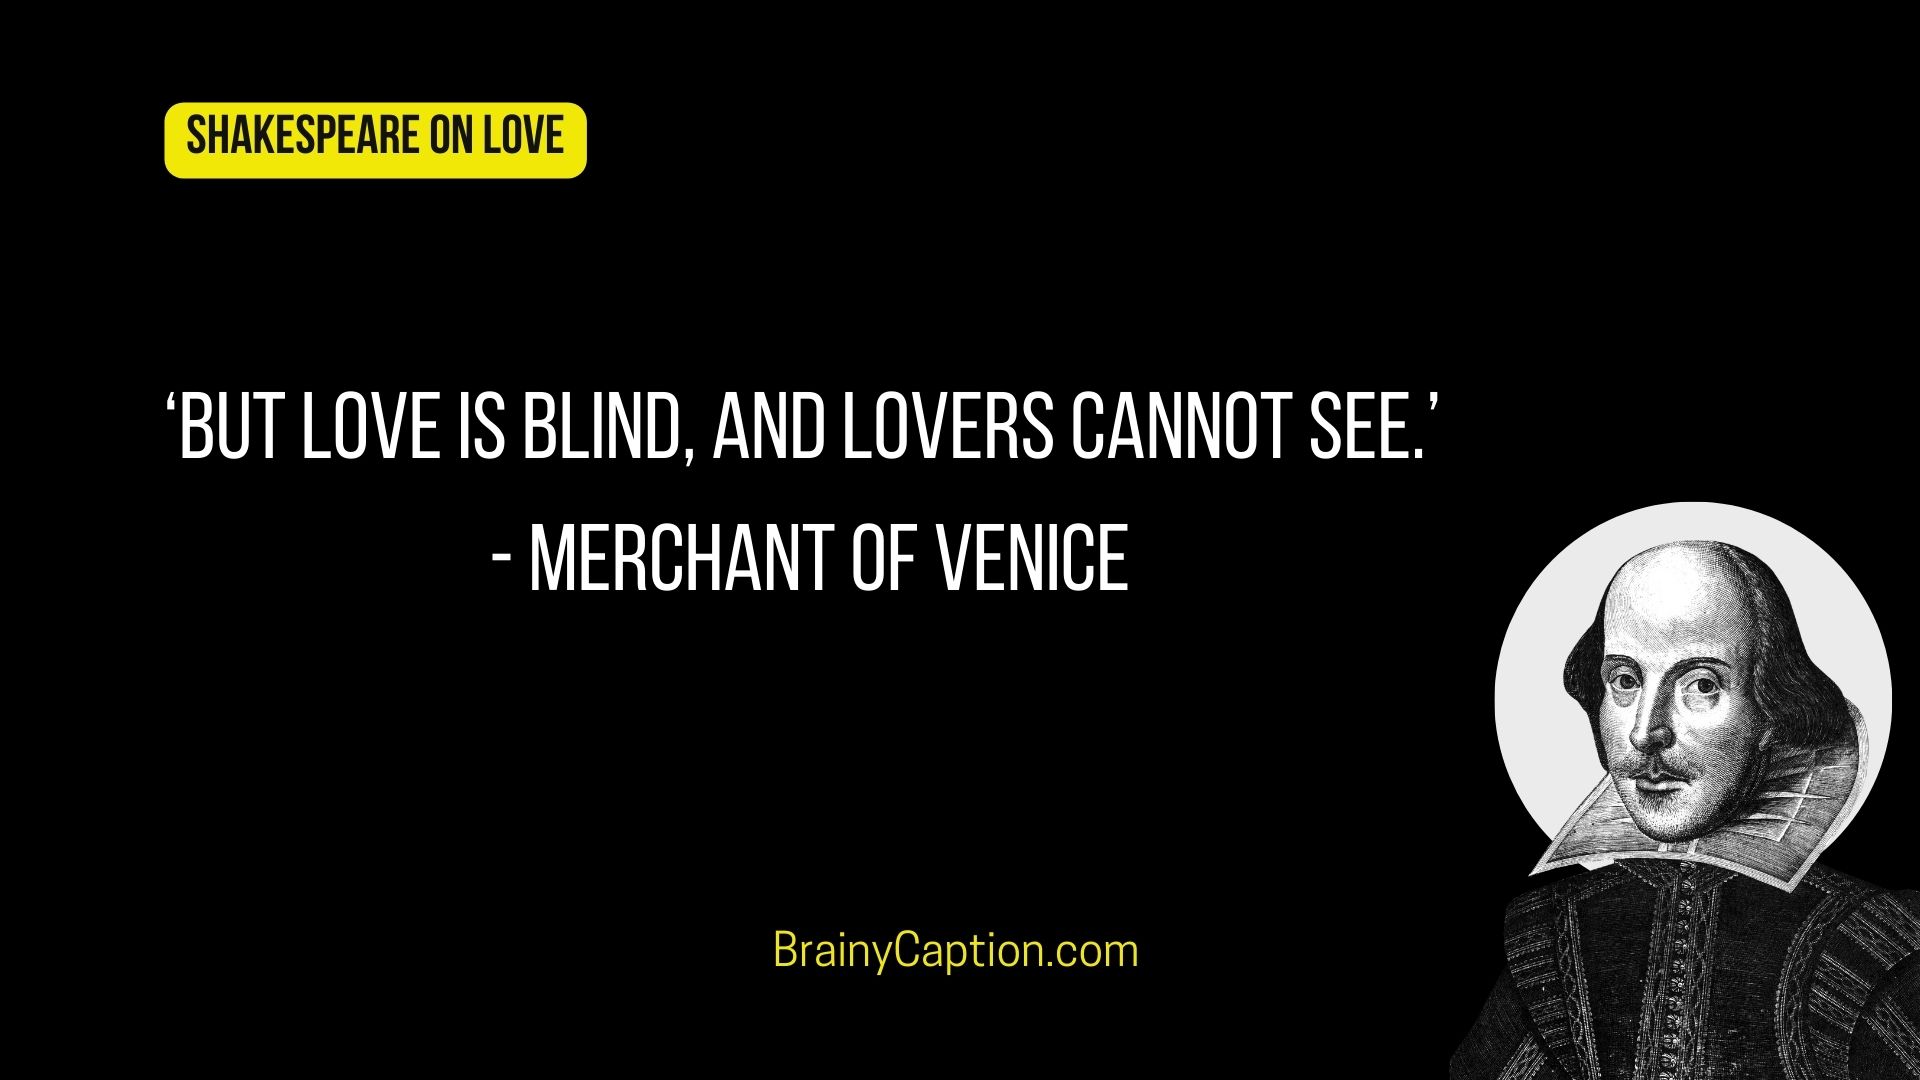 Shakespeare quotes on self love from Merchant of Venice